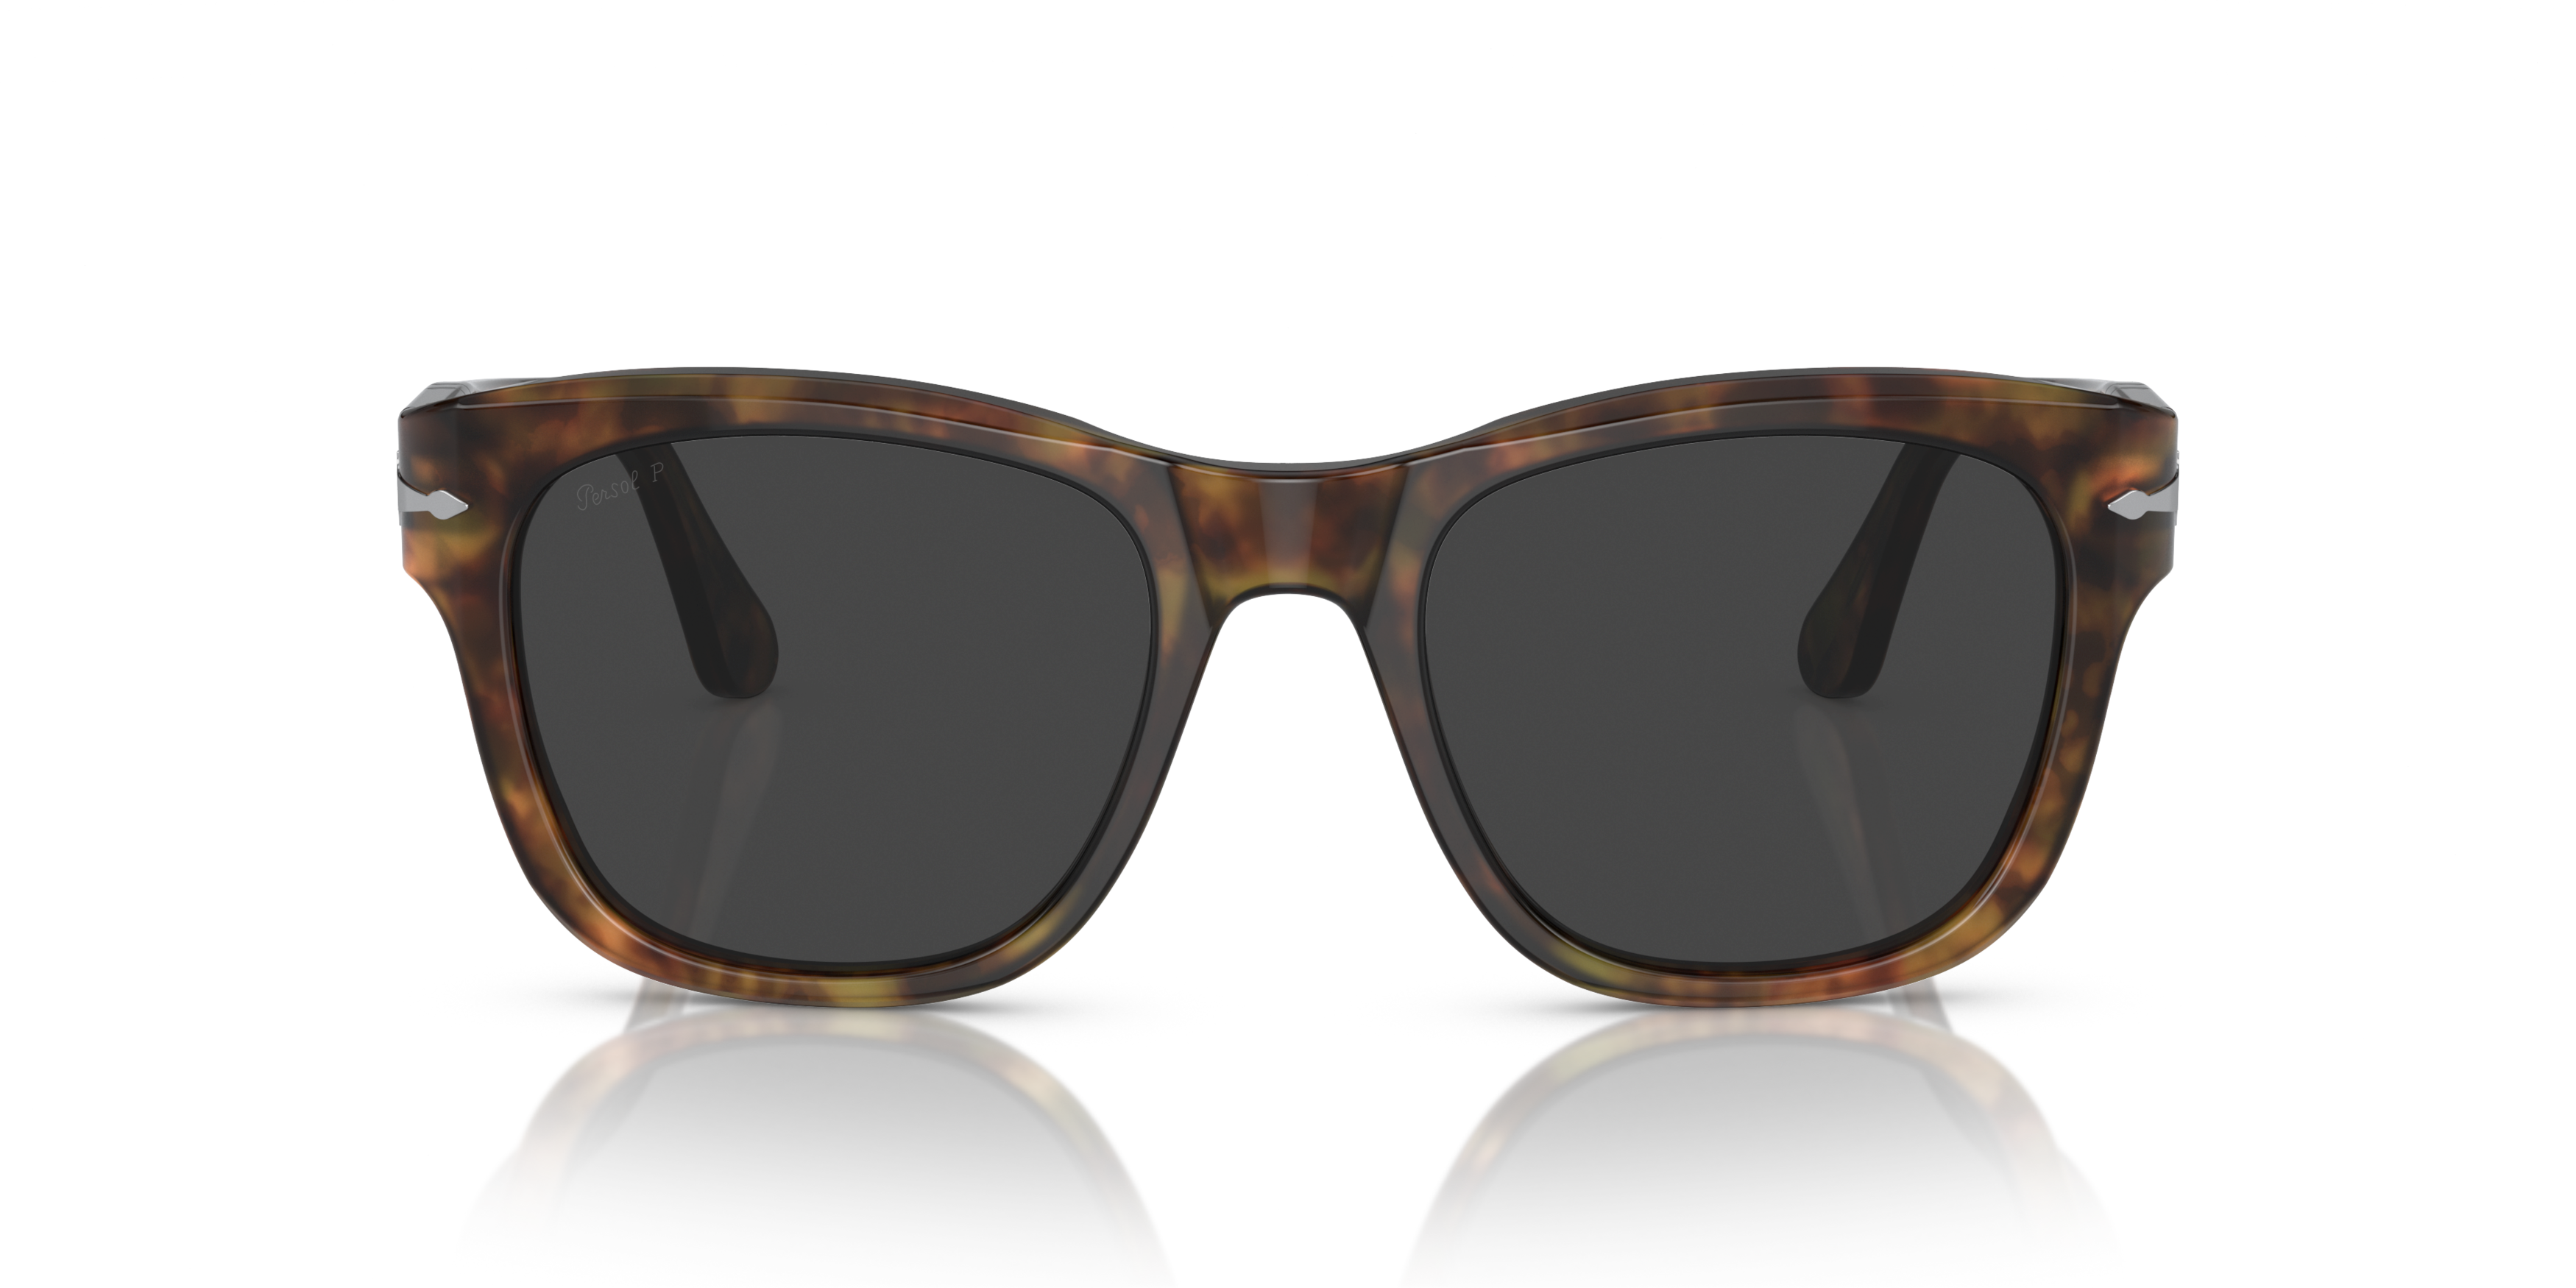 [products.image.front] Persol 0PO3313S 108/48